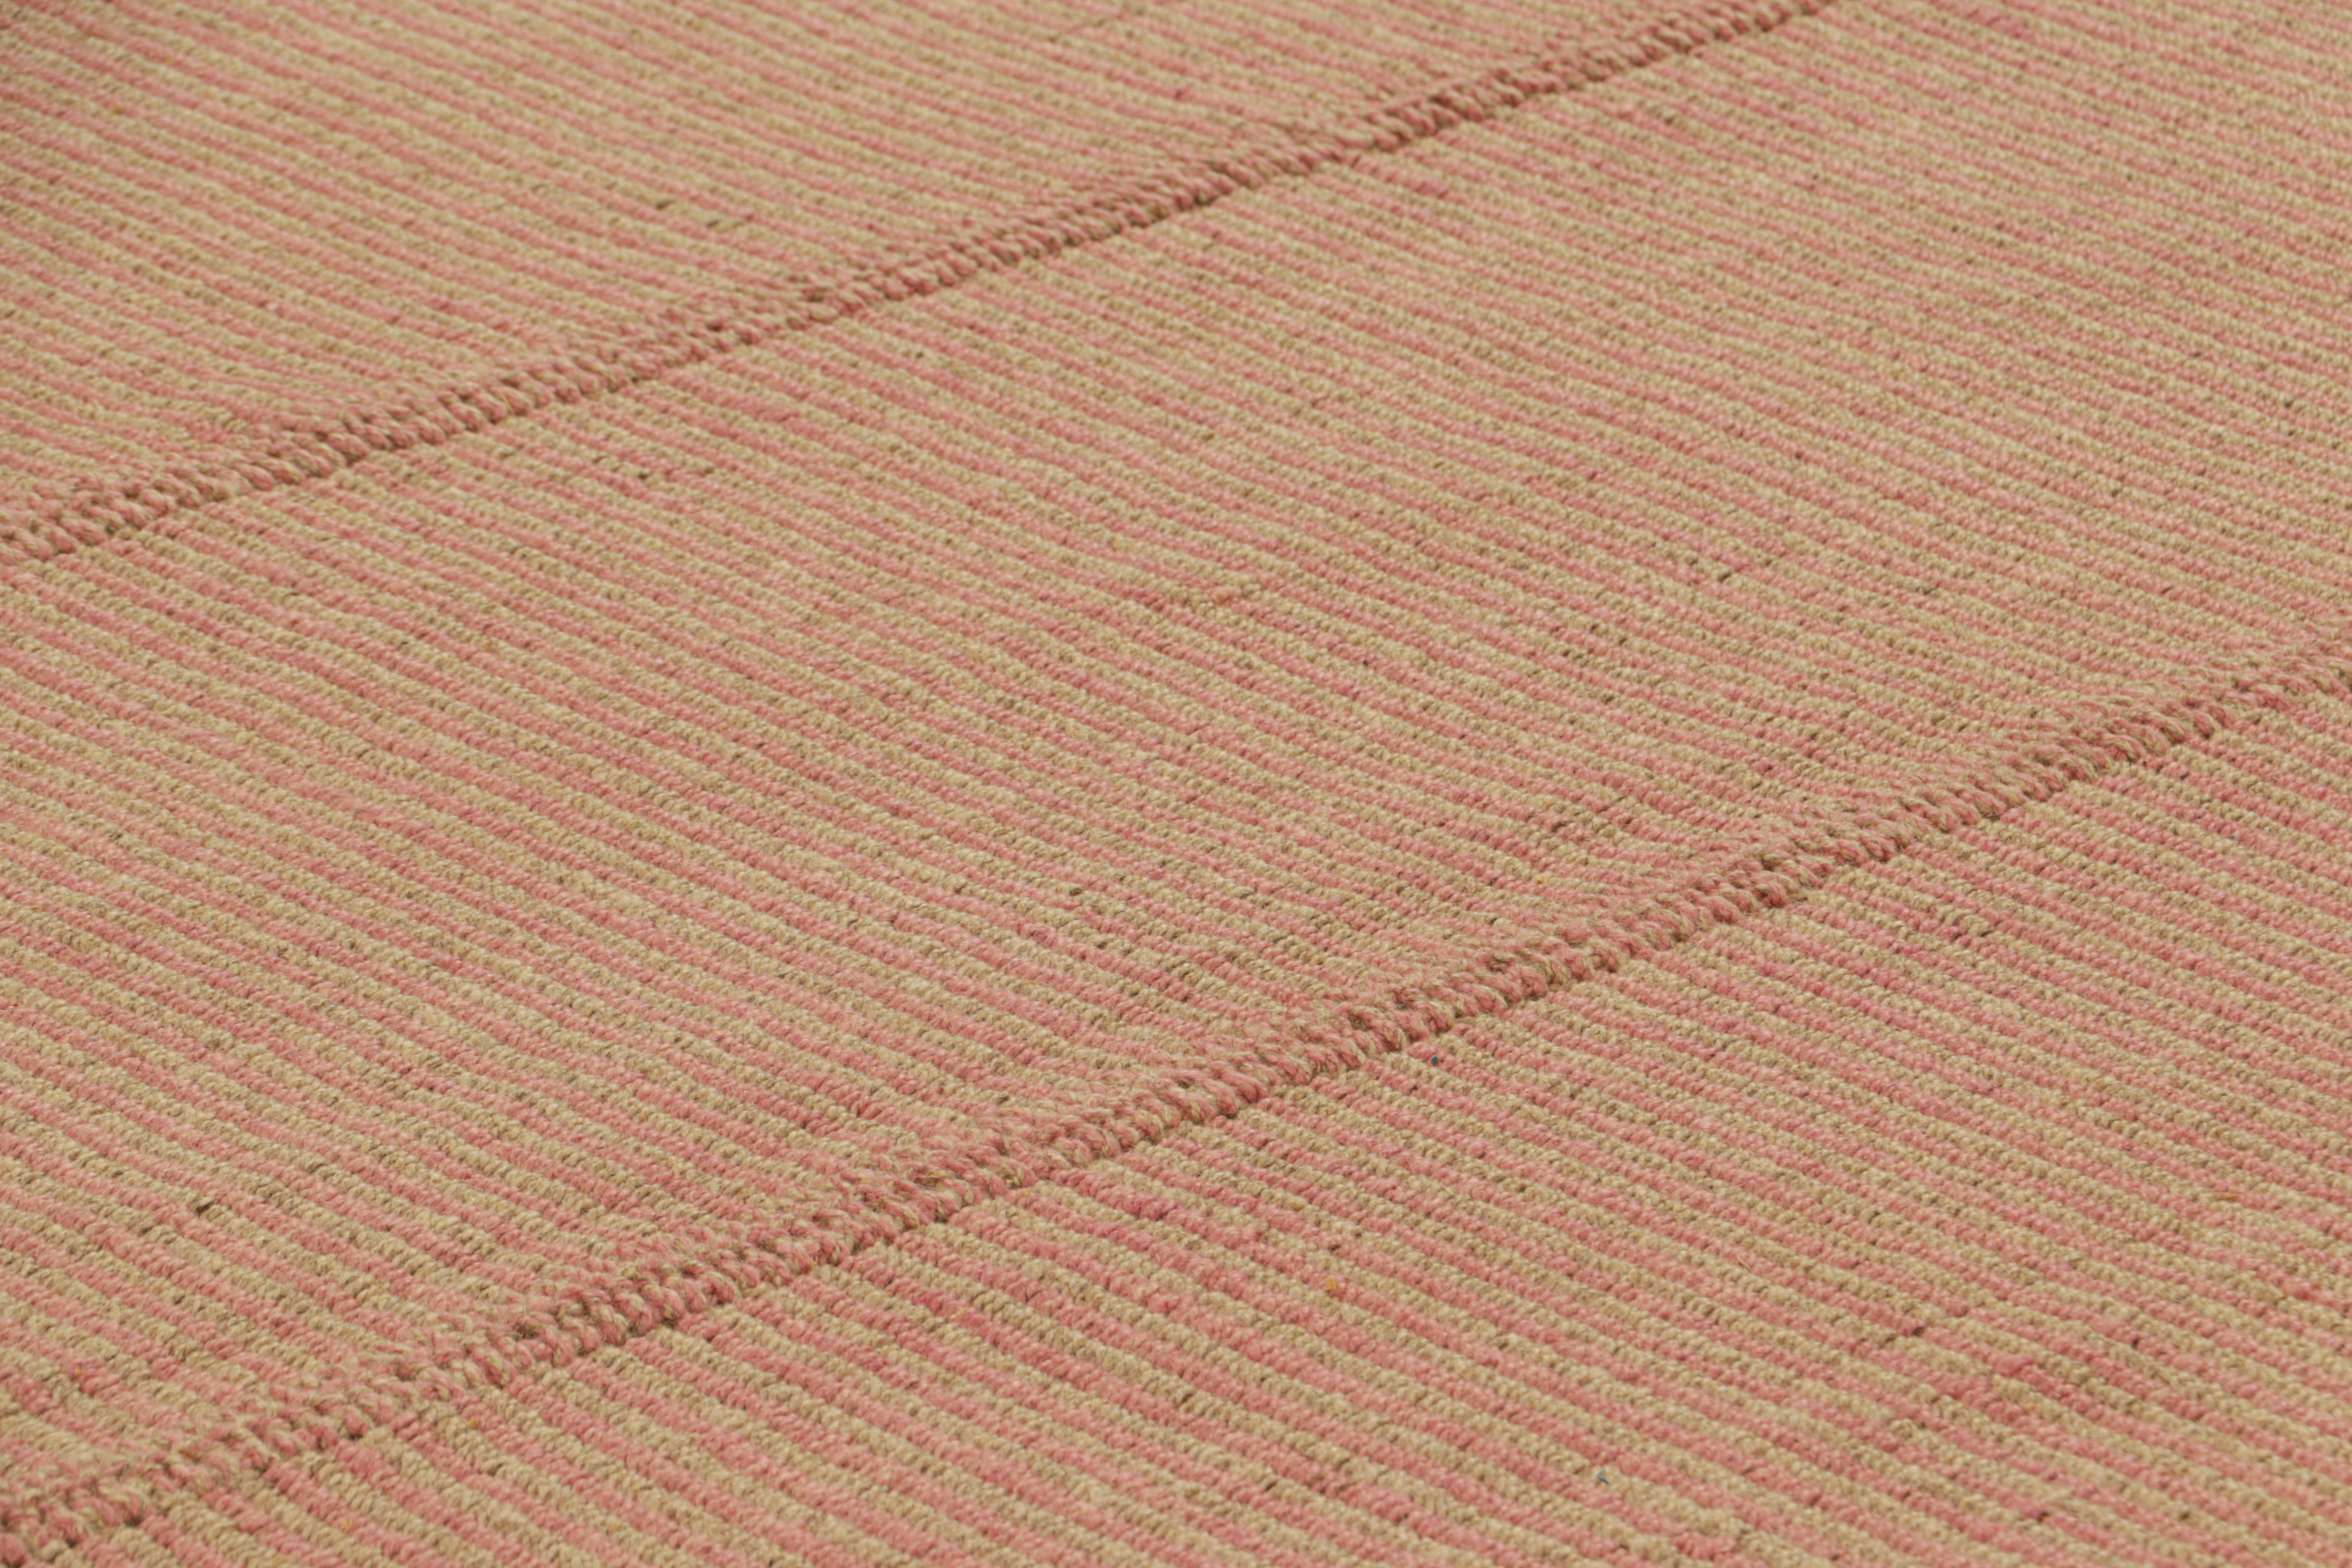 Handwoven in wool, this 8x10 Kilim is from an inventive new contemporary flat weave collection by Rug & Kilim.

On the Design: 

Fondly dubbed, “Rez Kilims”, this modern take on classic panel-weaving enjoys a fabulous, unique play of pink and beige